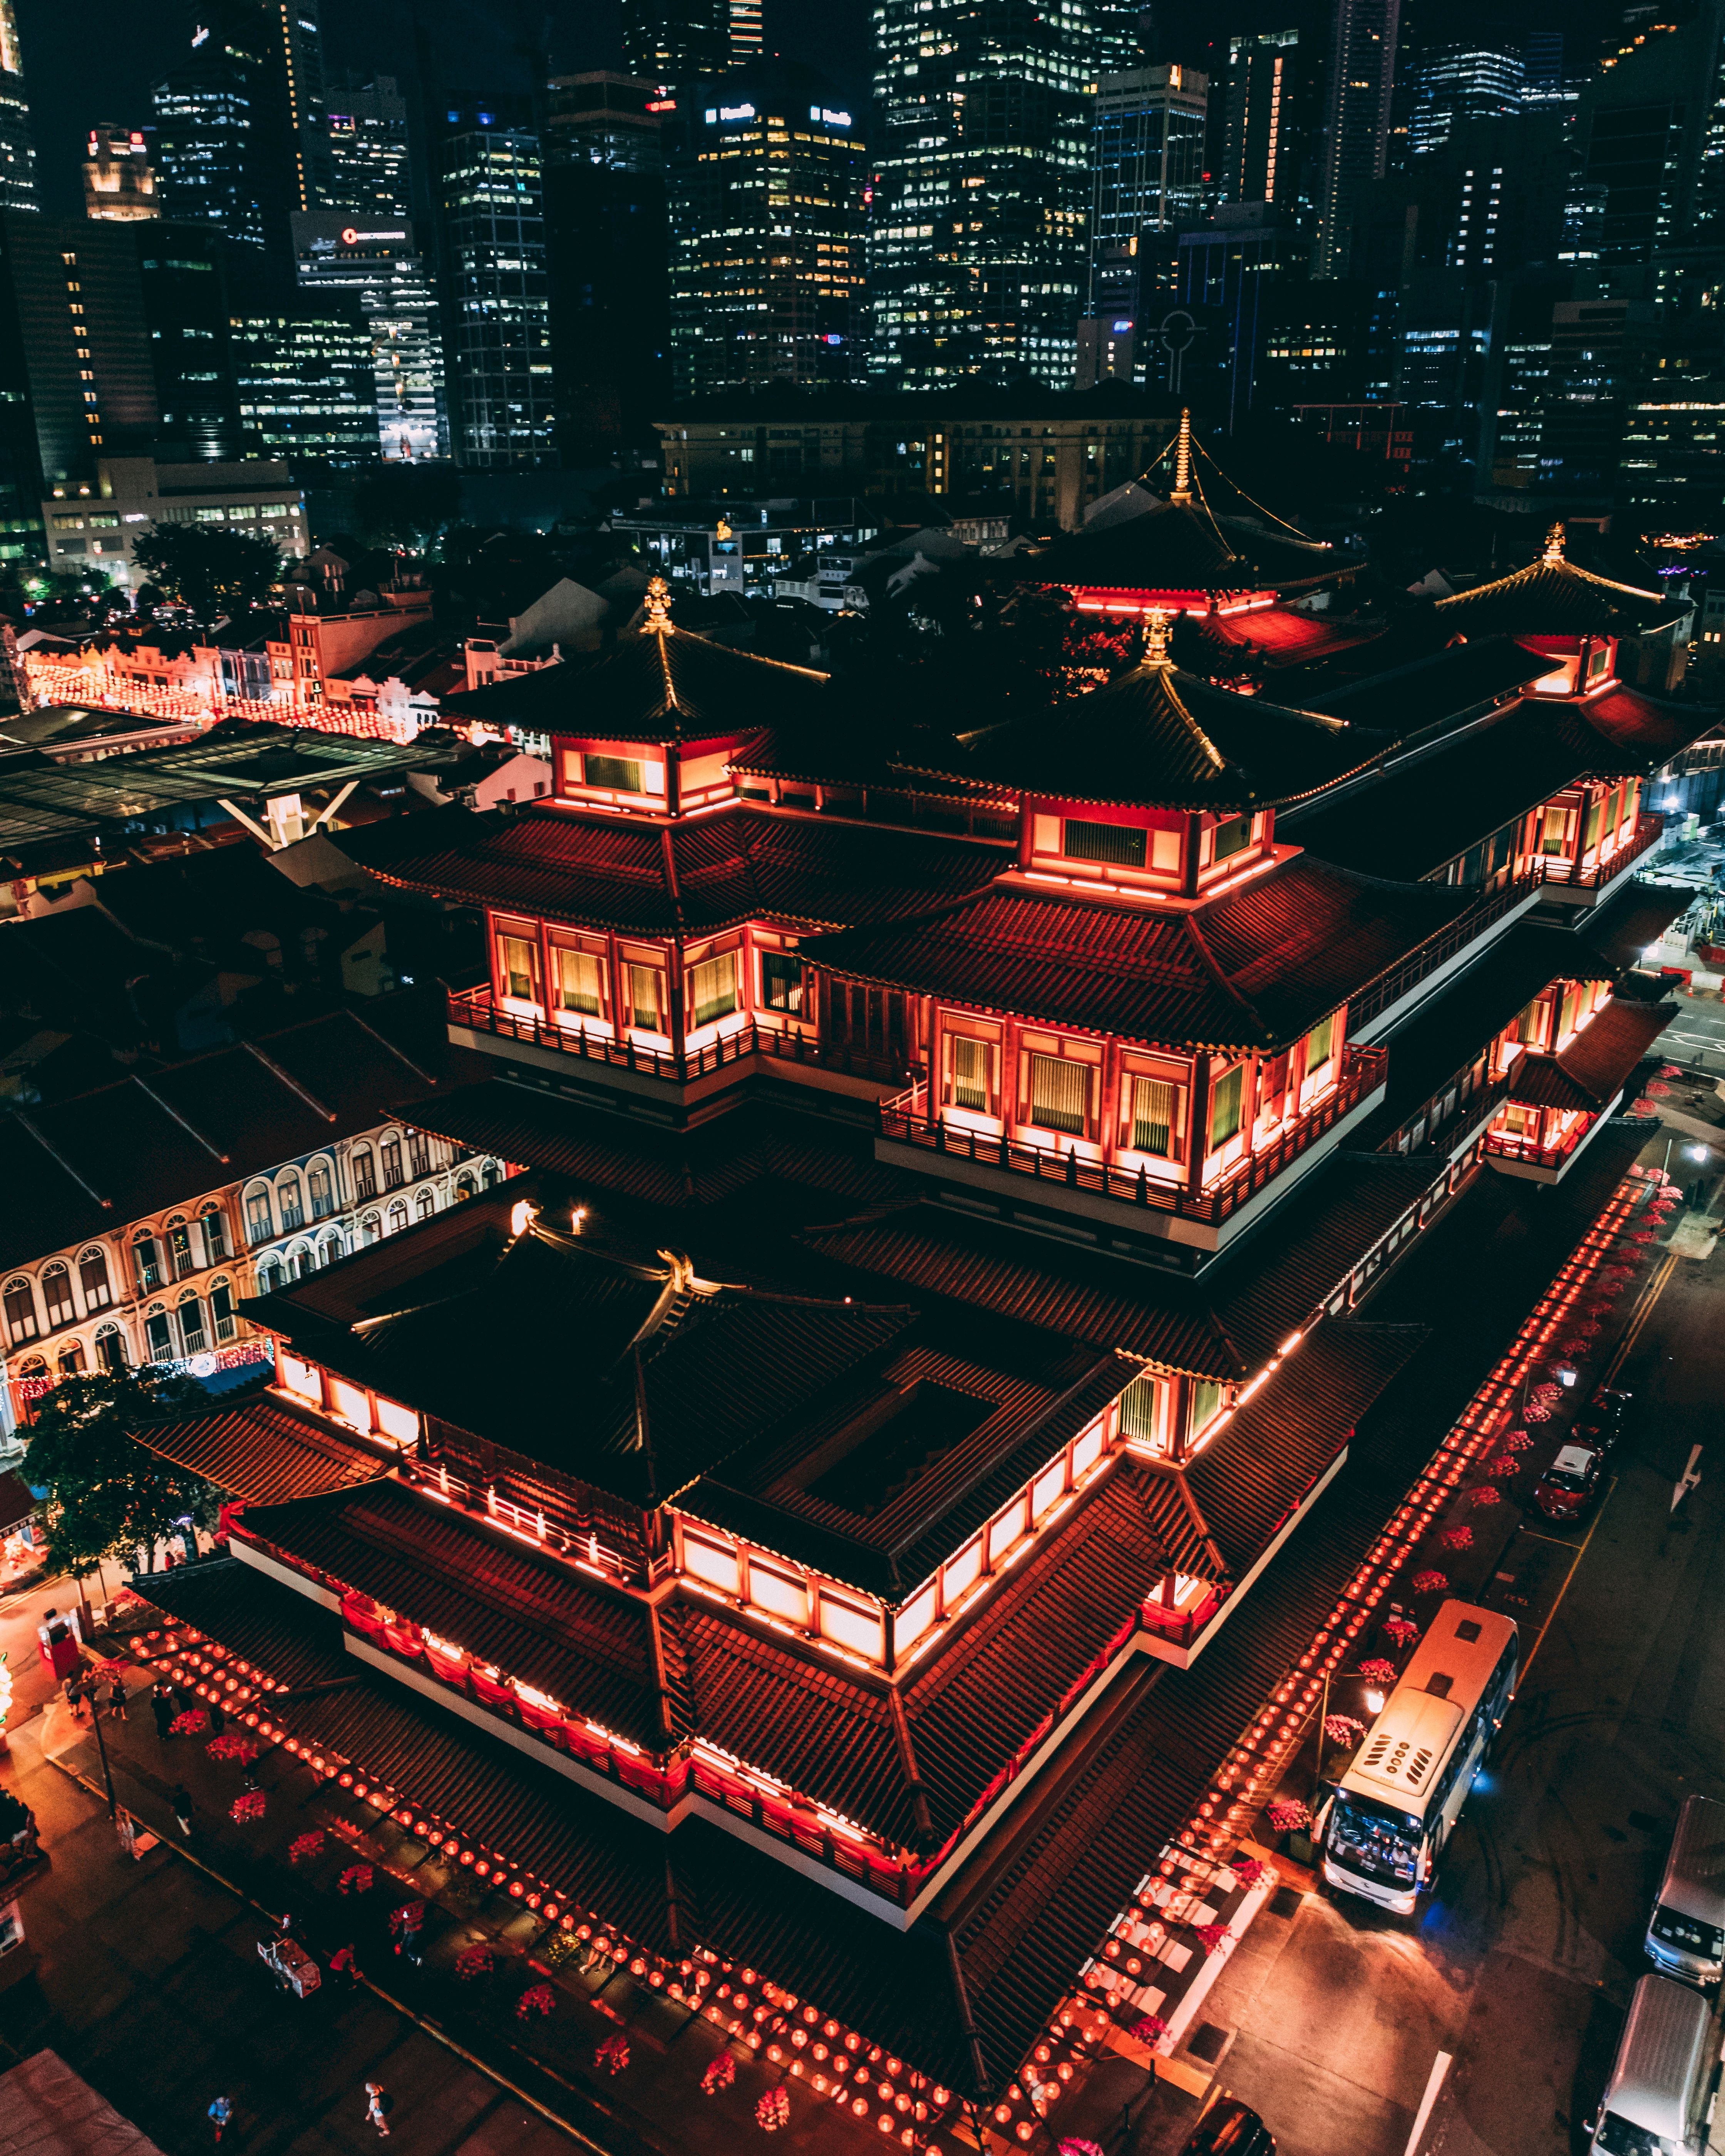 pagoda, cities, architecture, view from above, night city, roof, china, roofs images